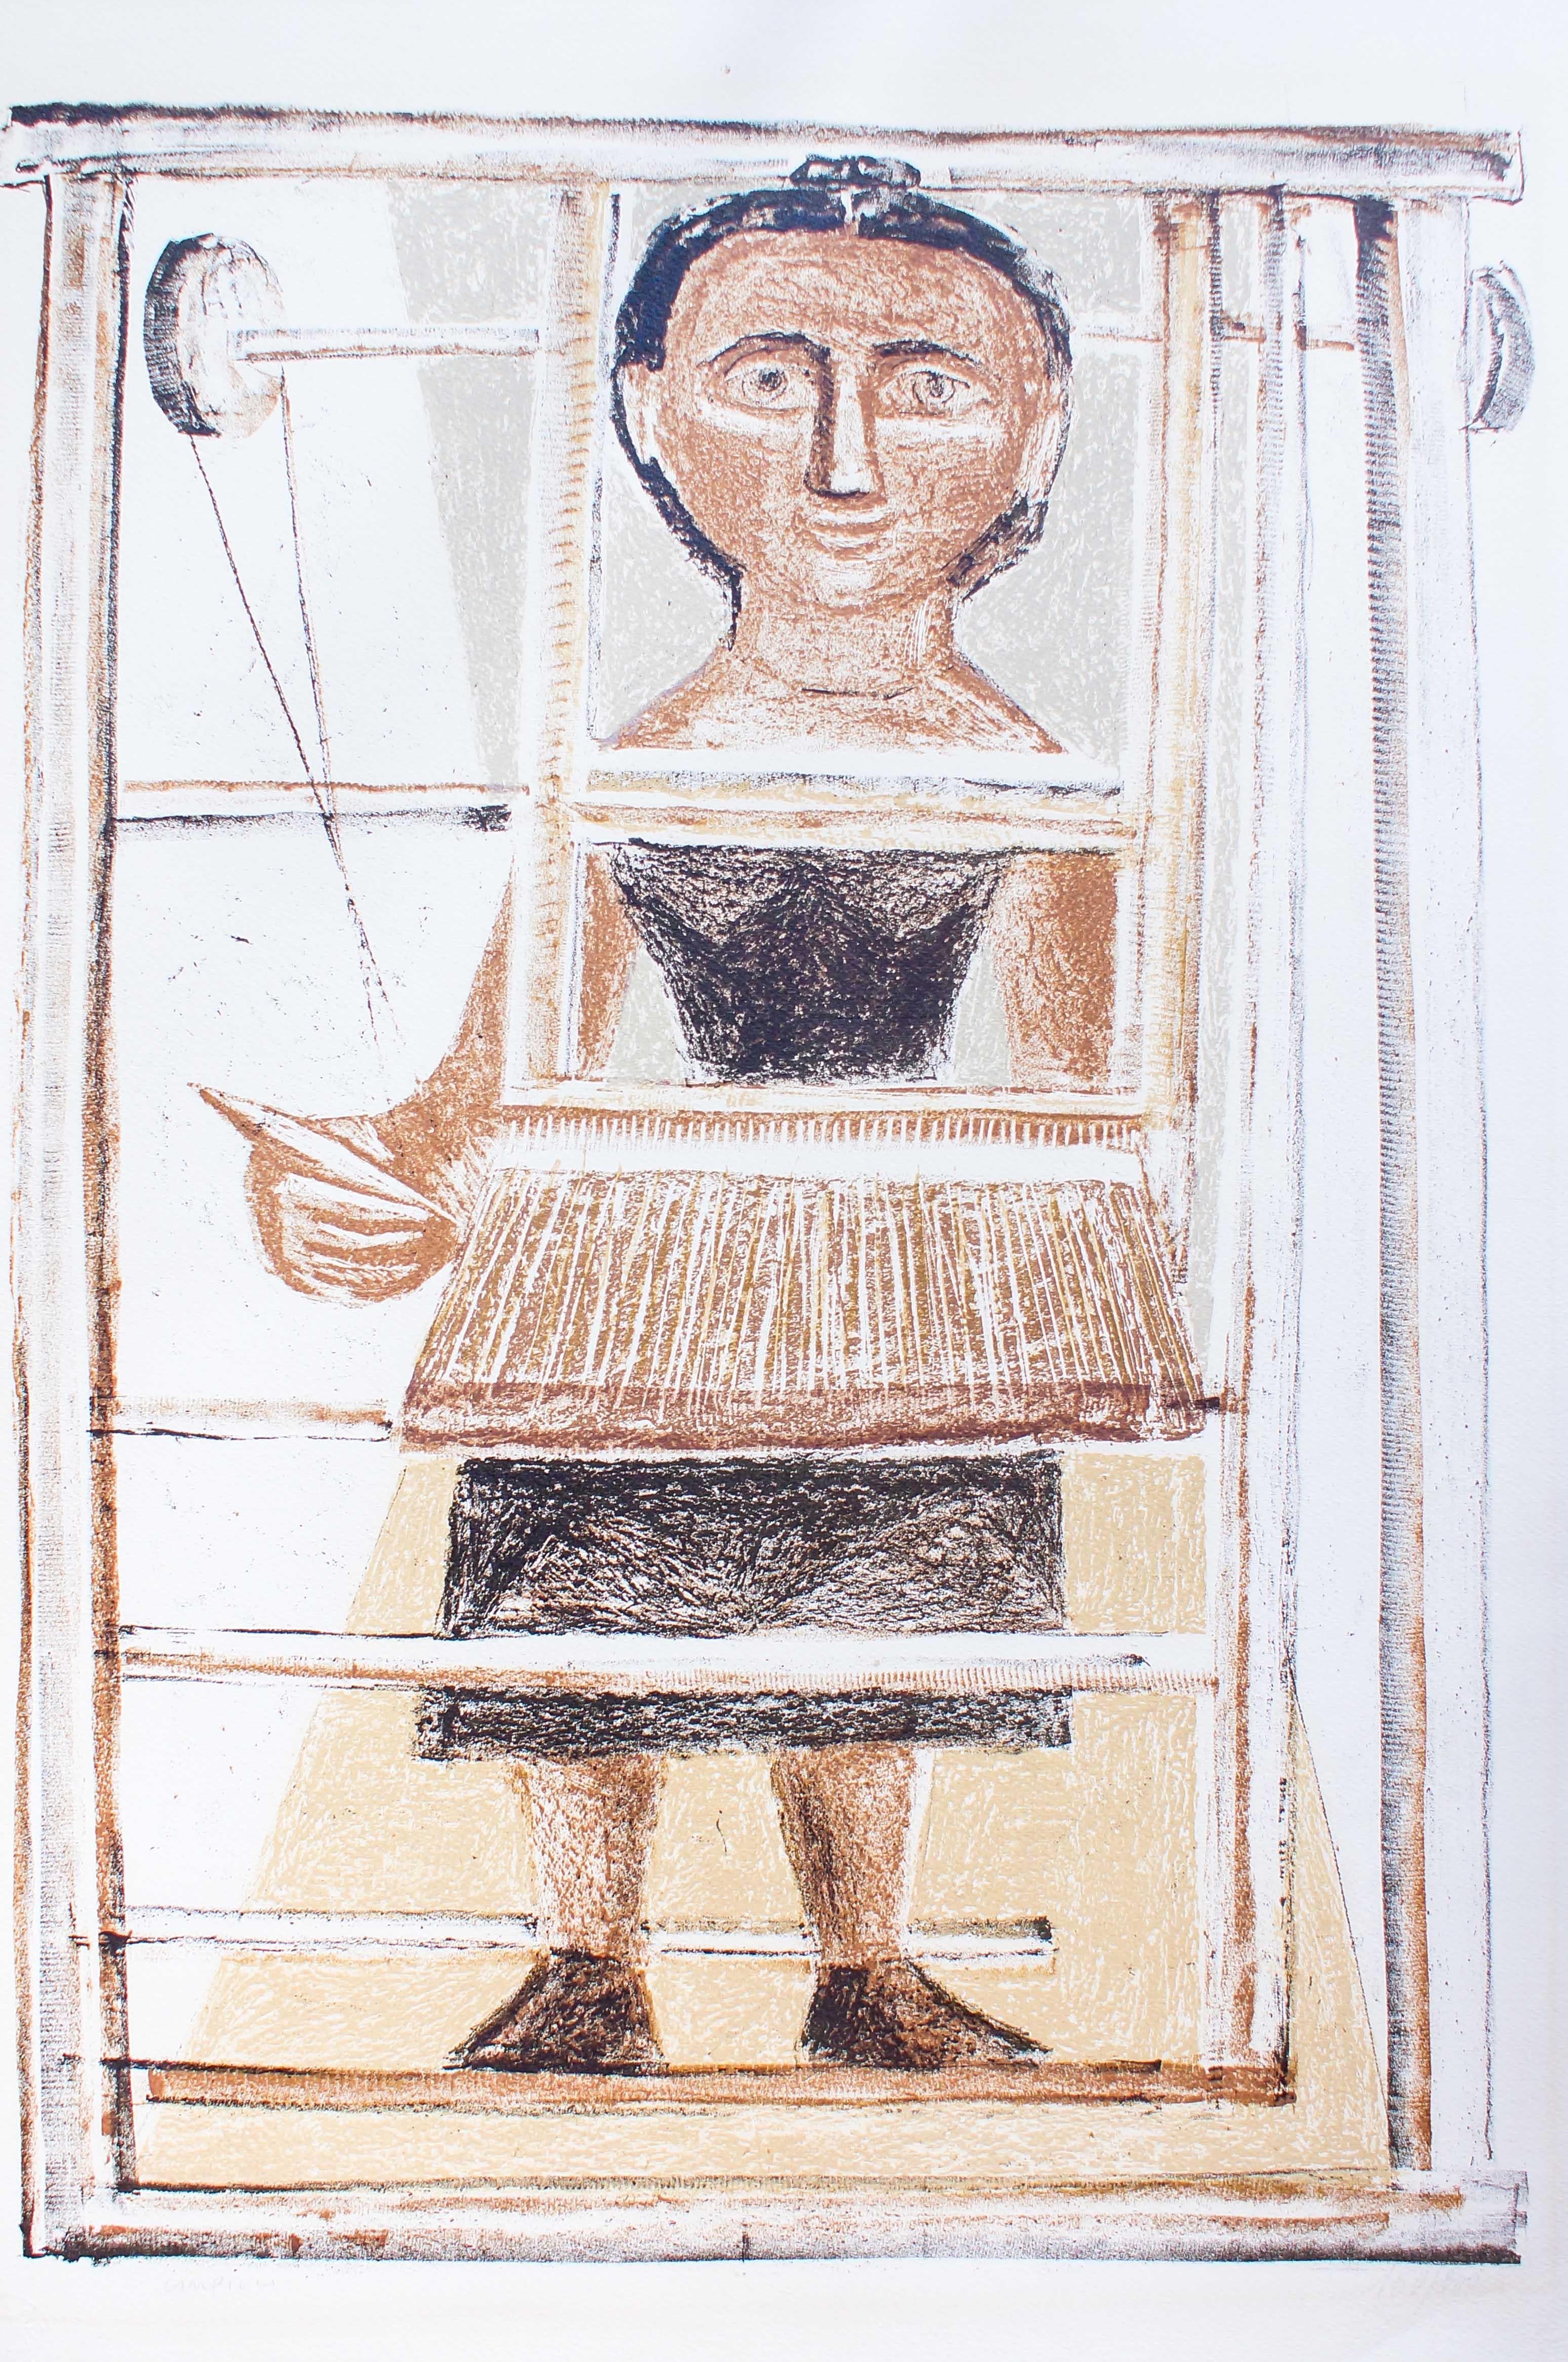 Hand signed.
In “La Tessitrice” (“The Weaver”), an hand signed lithograph by Massimo Campigli, the artist represents a weaver. The female figure protagonist of the composition is working with the loom and her gaze seems to be focused on the